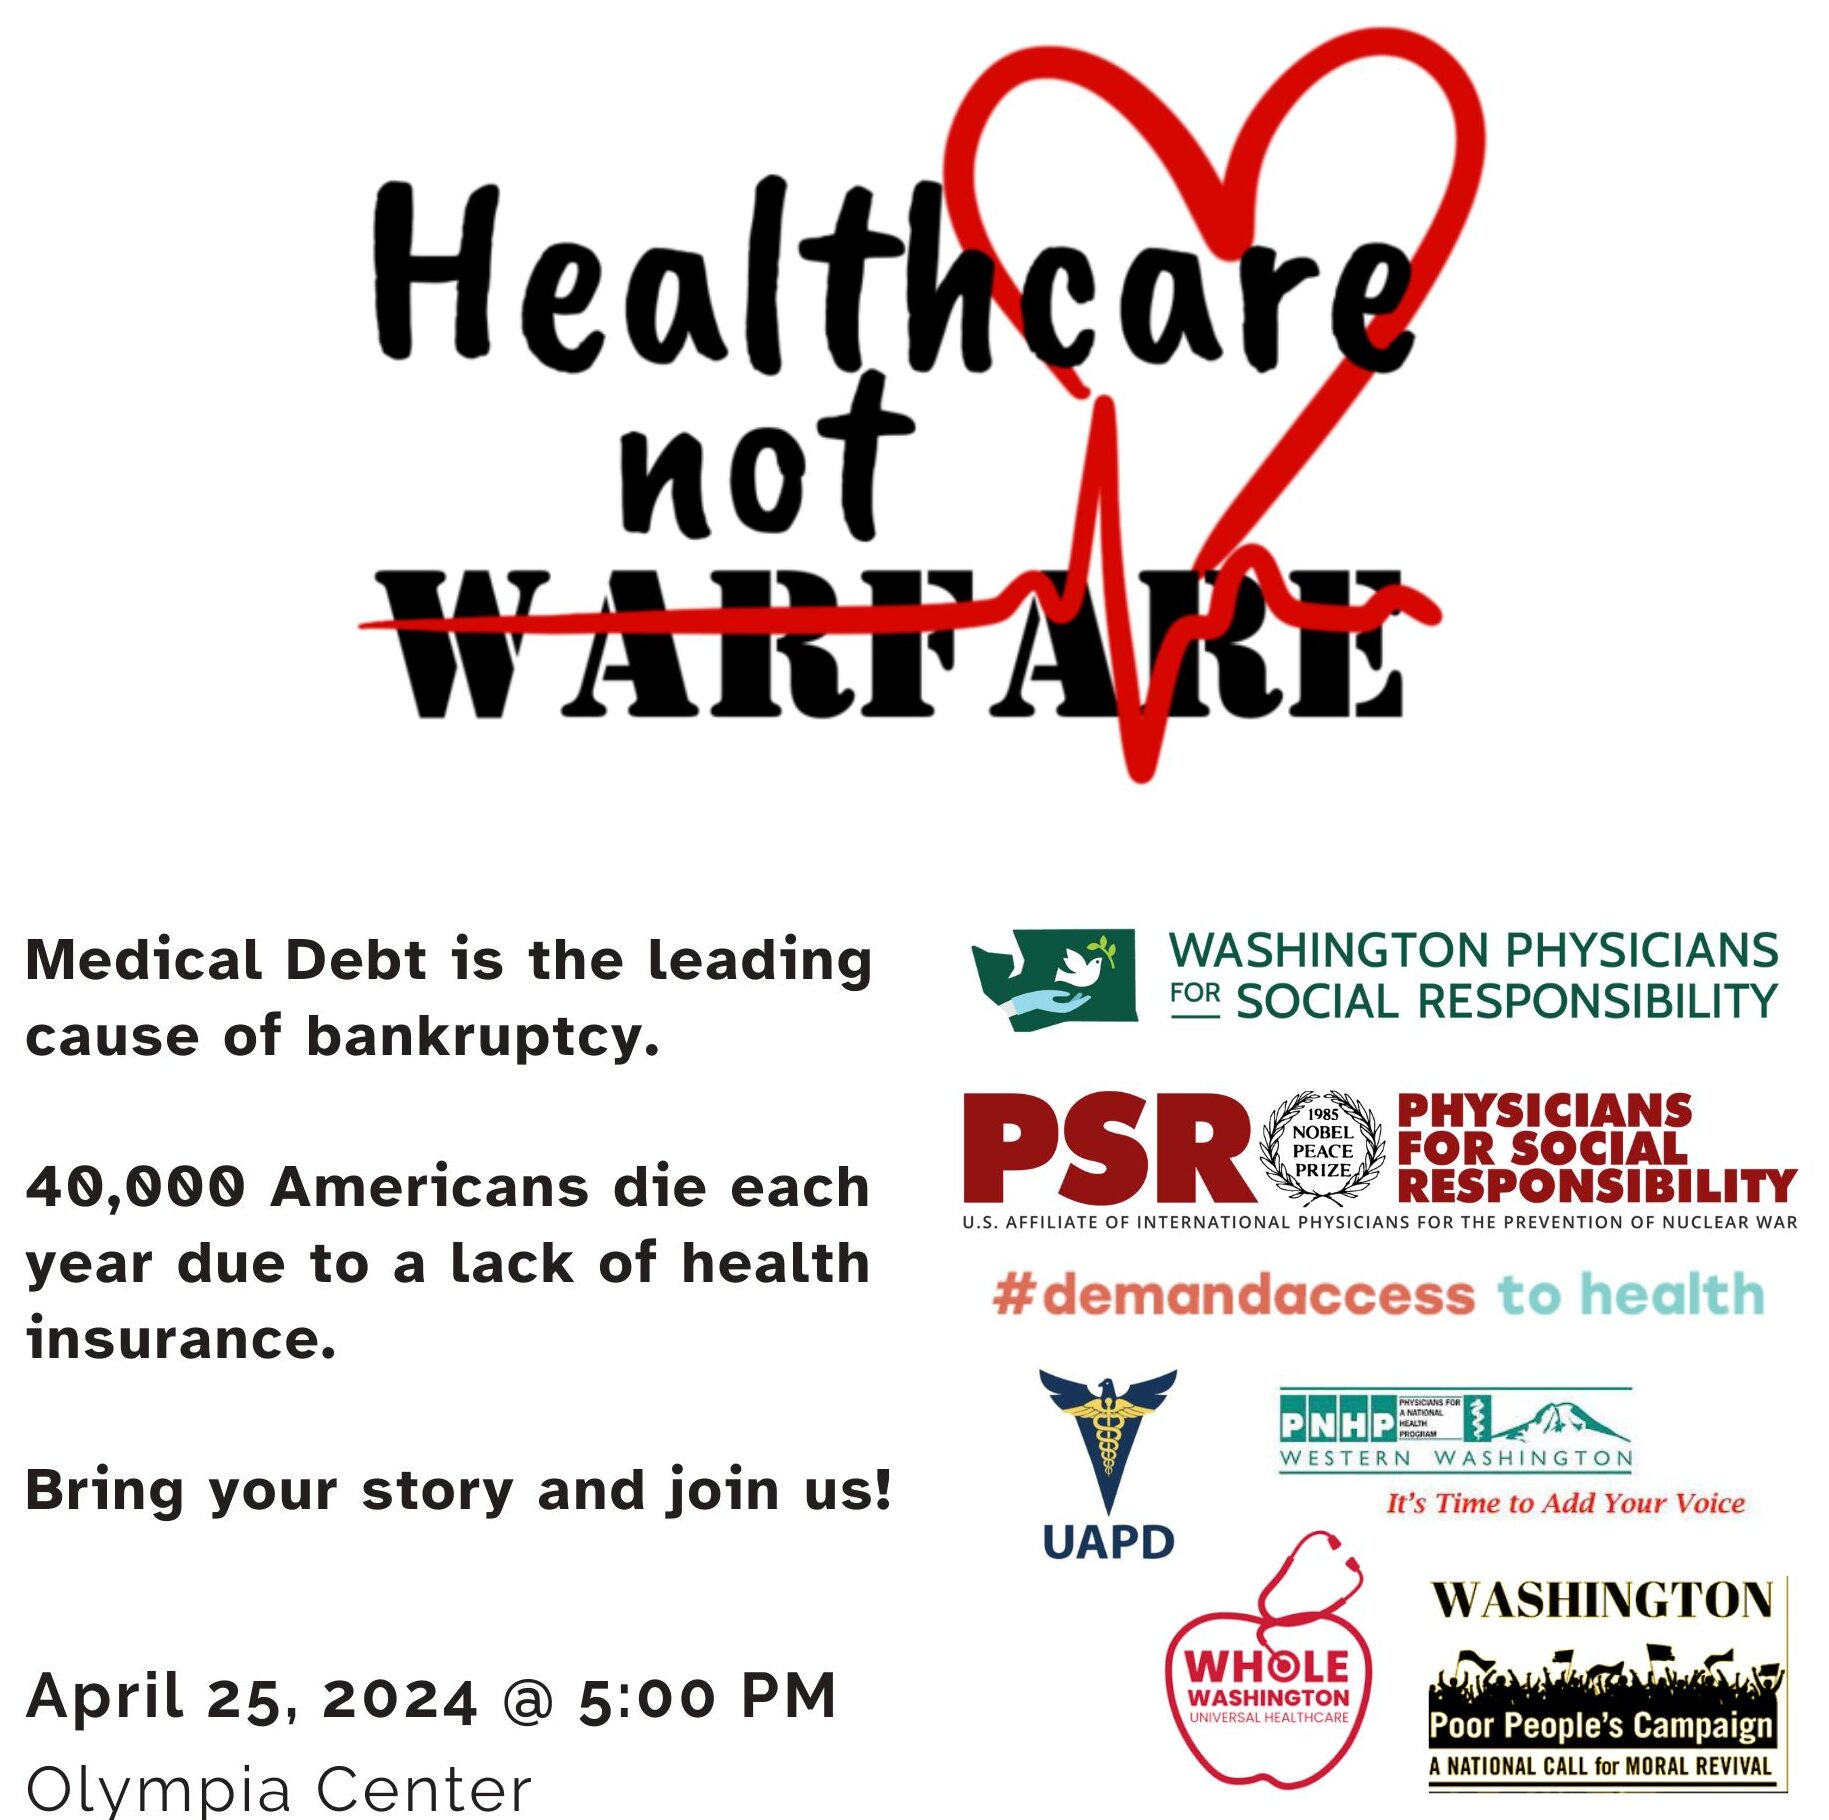 Medical Debt is the leading cause of Bankruptcy. 40,000 Americans die each year to due to lack of health insurance. Bring your story and join us!